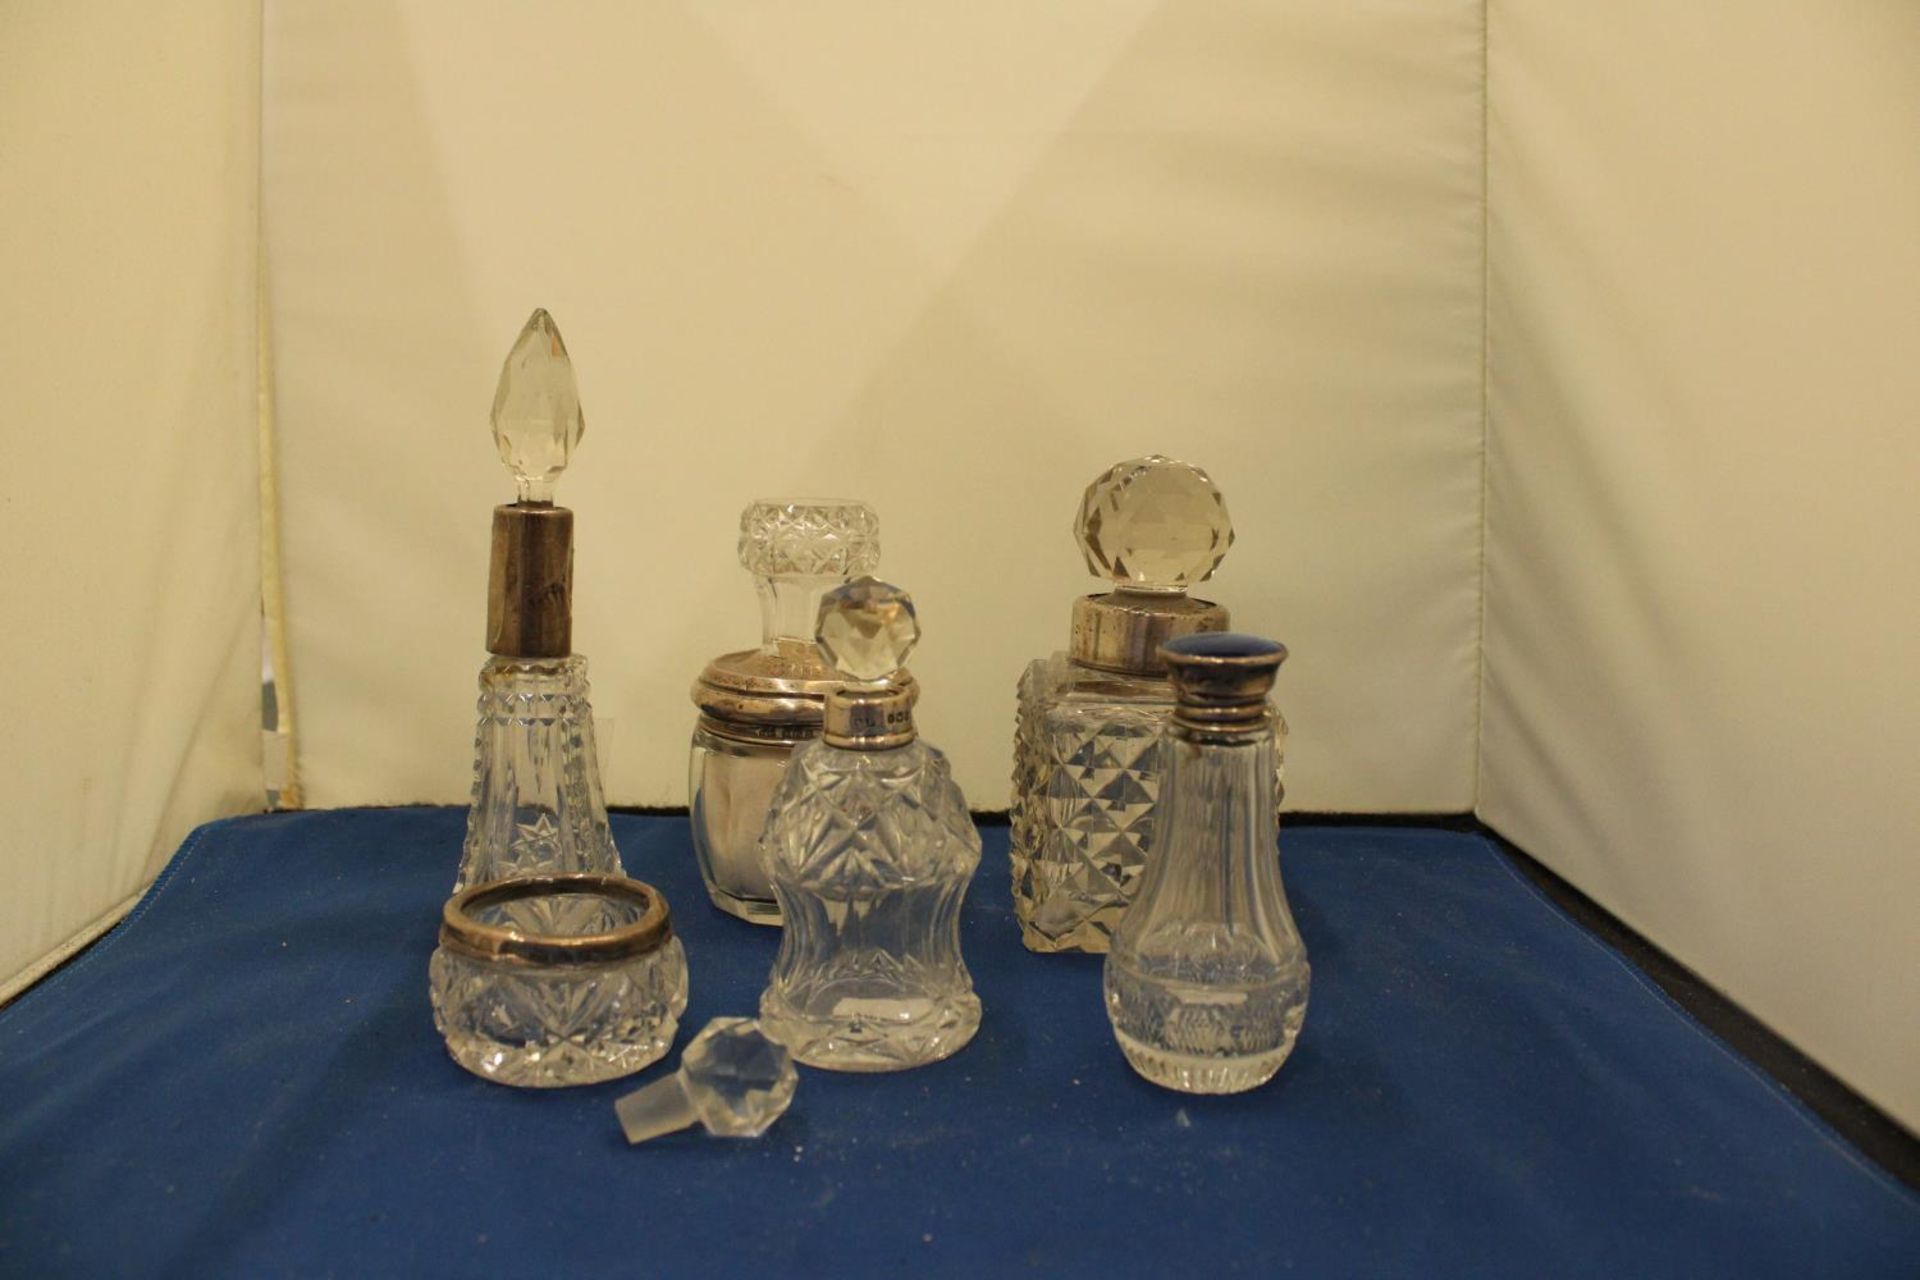 SIX PIECES OF GLASSWARE WITH MARKED SILVER COLLARS, LIDS, RIMS TO INCLUDE A BLUE ENAMEL